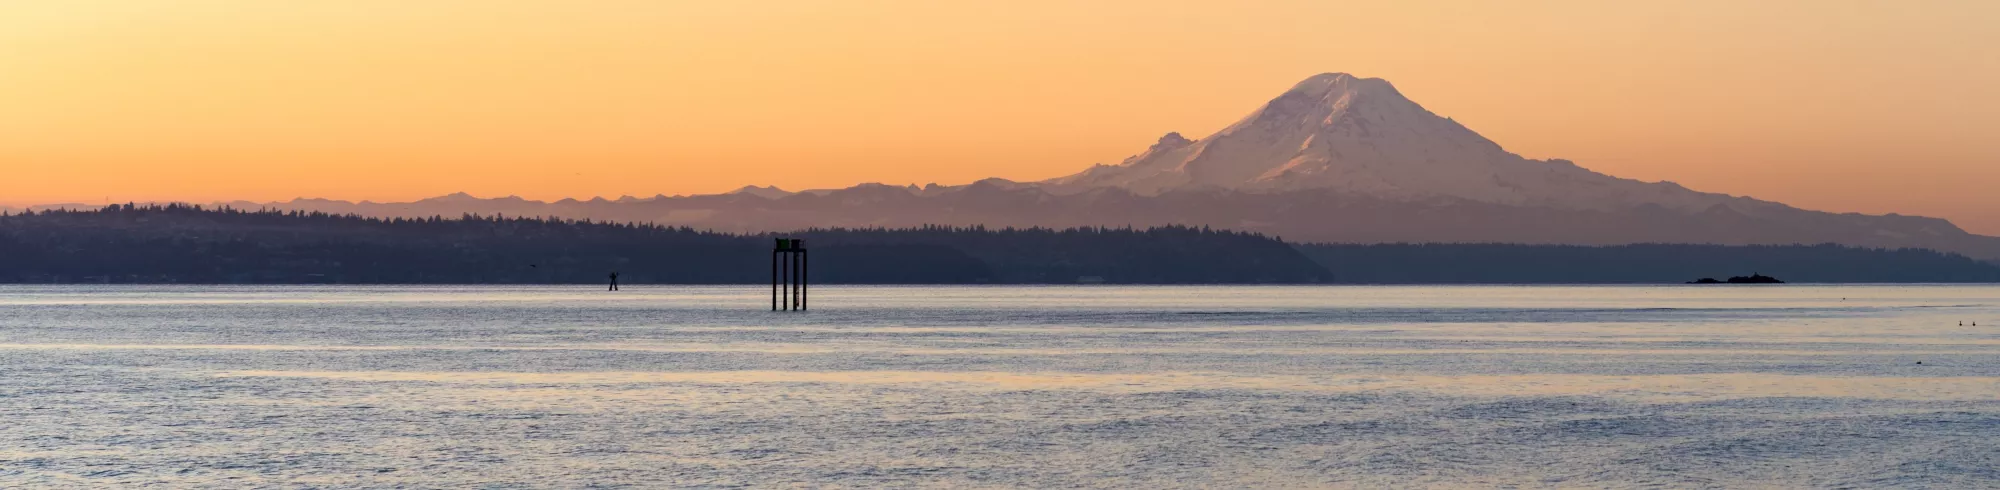 Photo of Bellingham Bay at dusk, with Mount Baker large in the background.